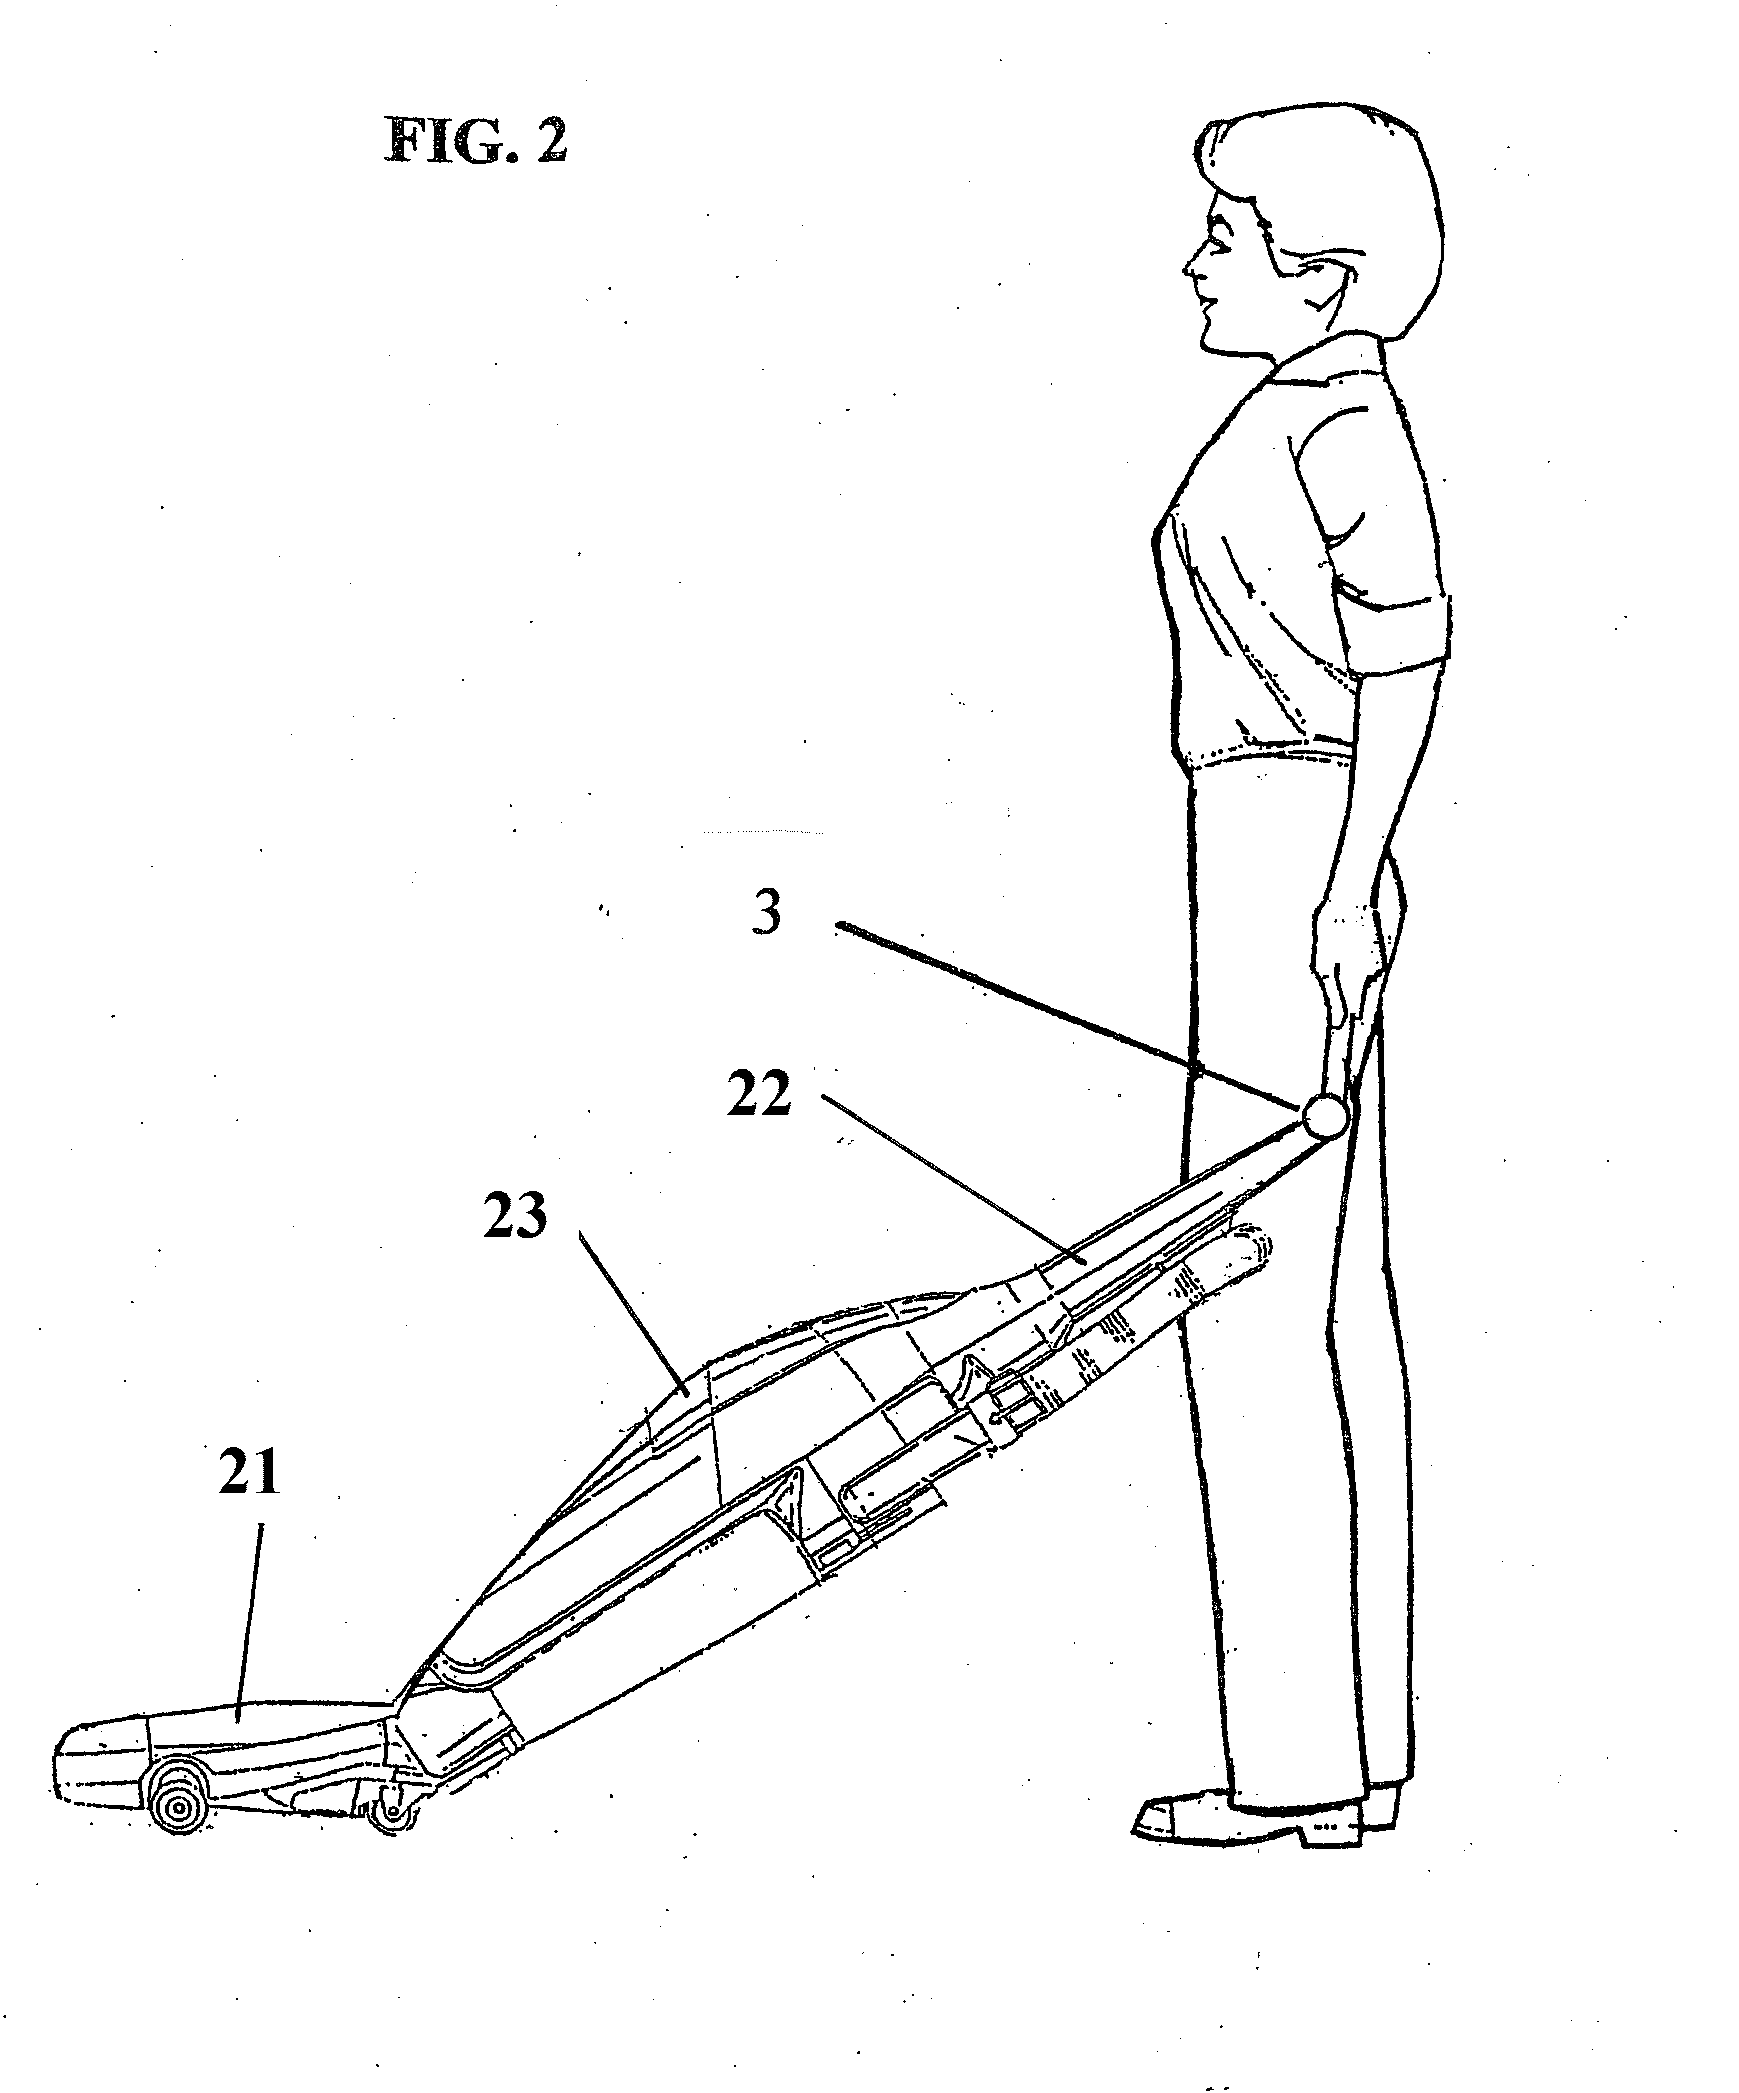 Vacuum cleaner with swivel and swing handle